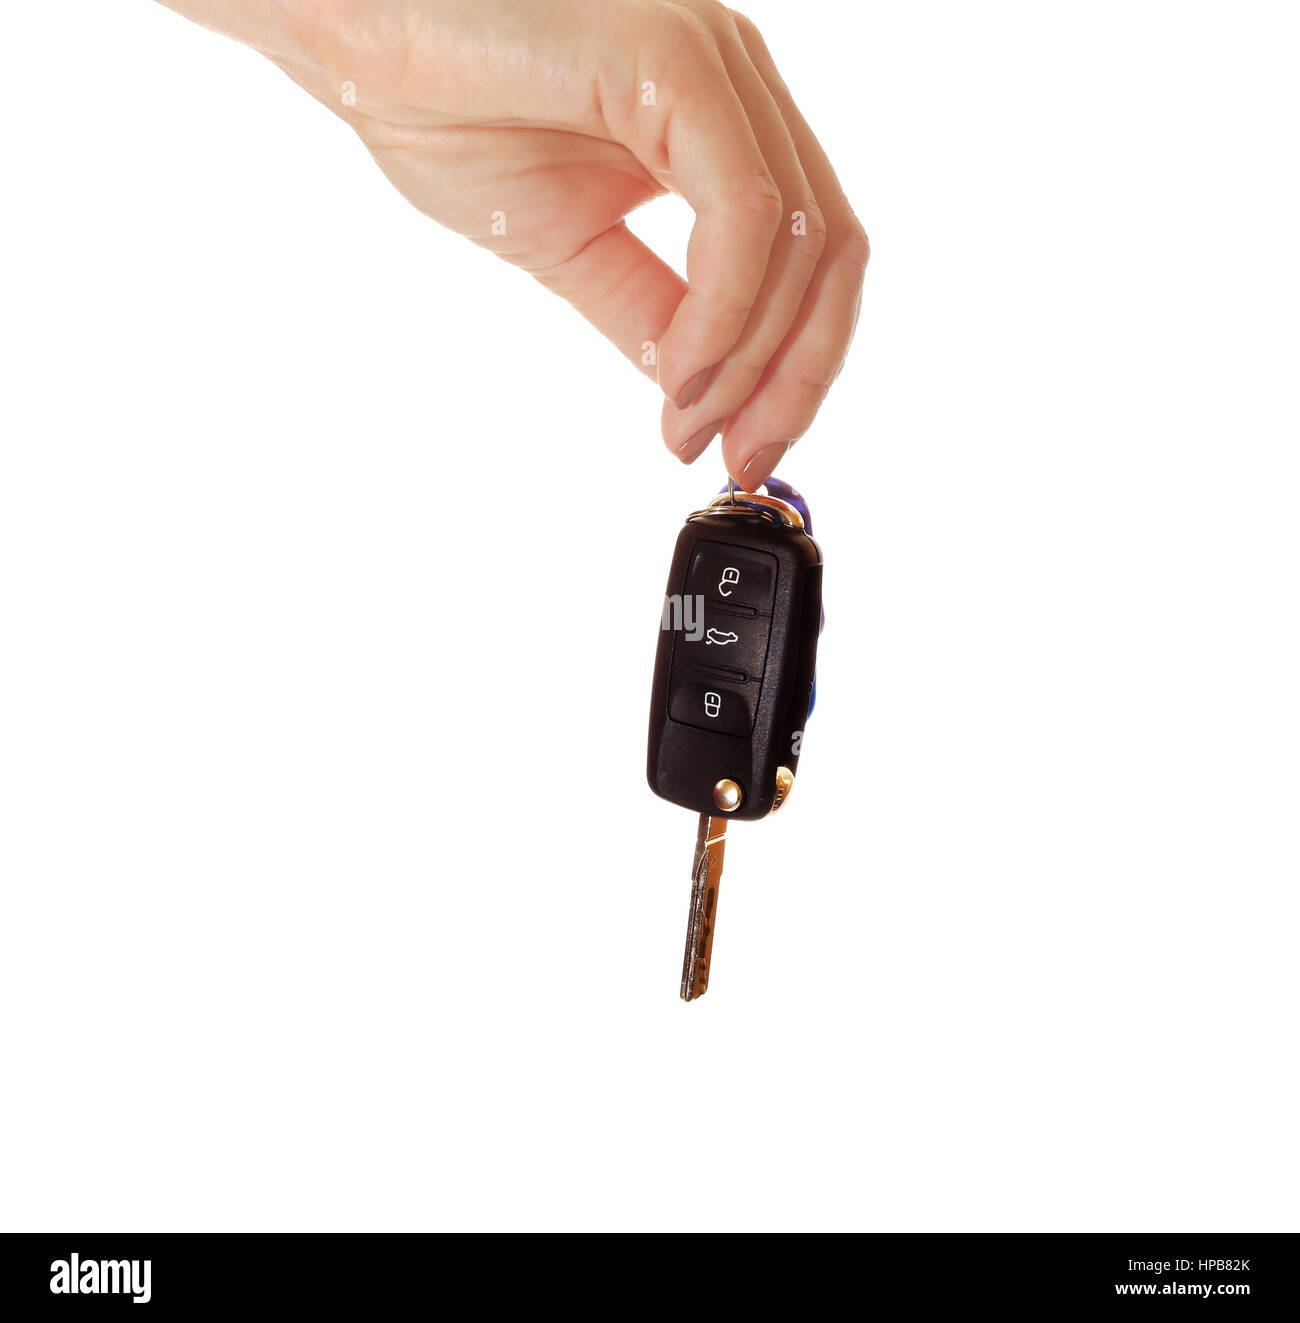 Ignition car key ring stock image. Image of metal, ignition - 19677391